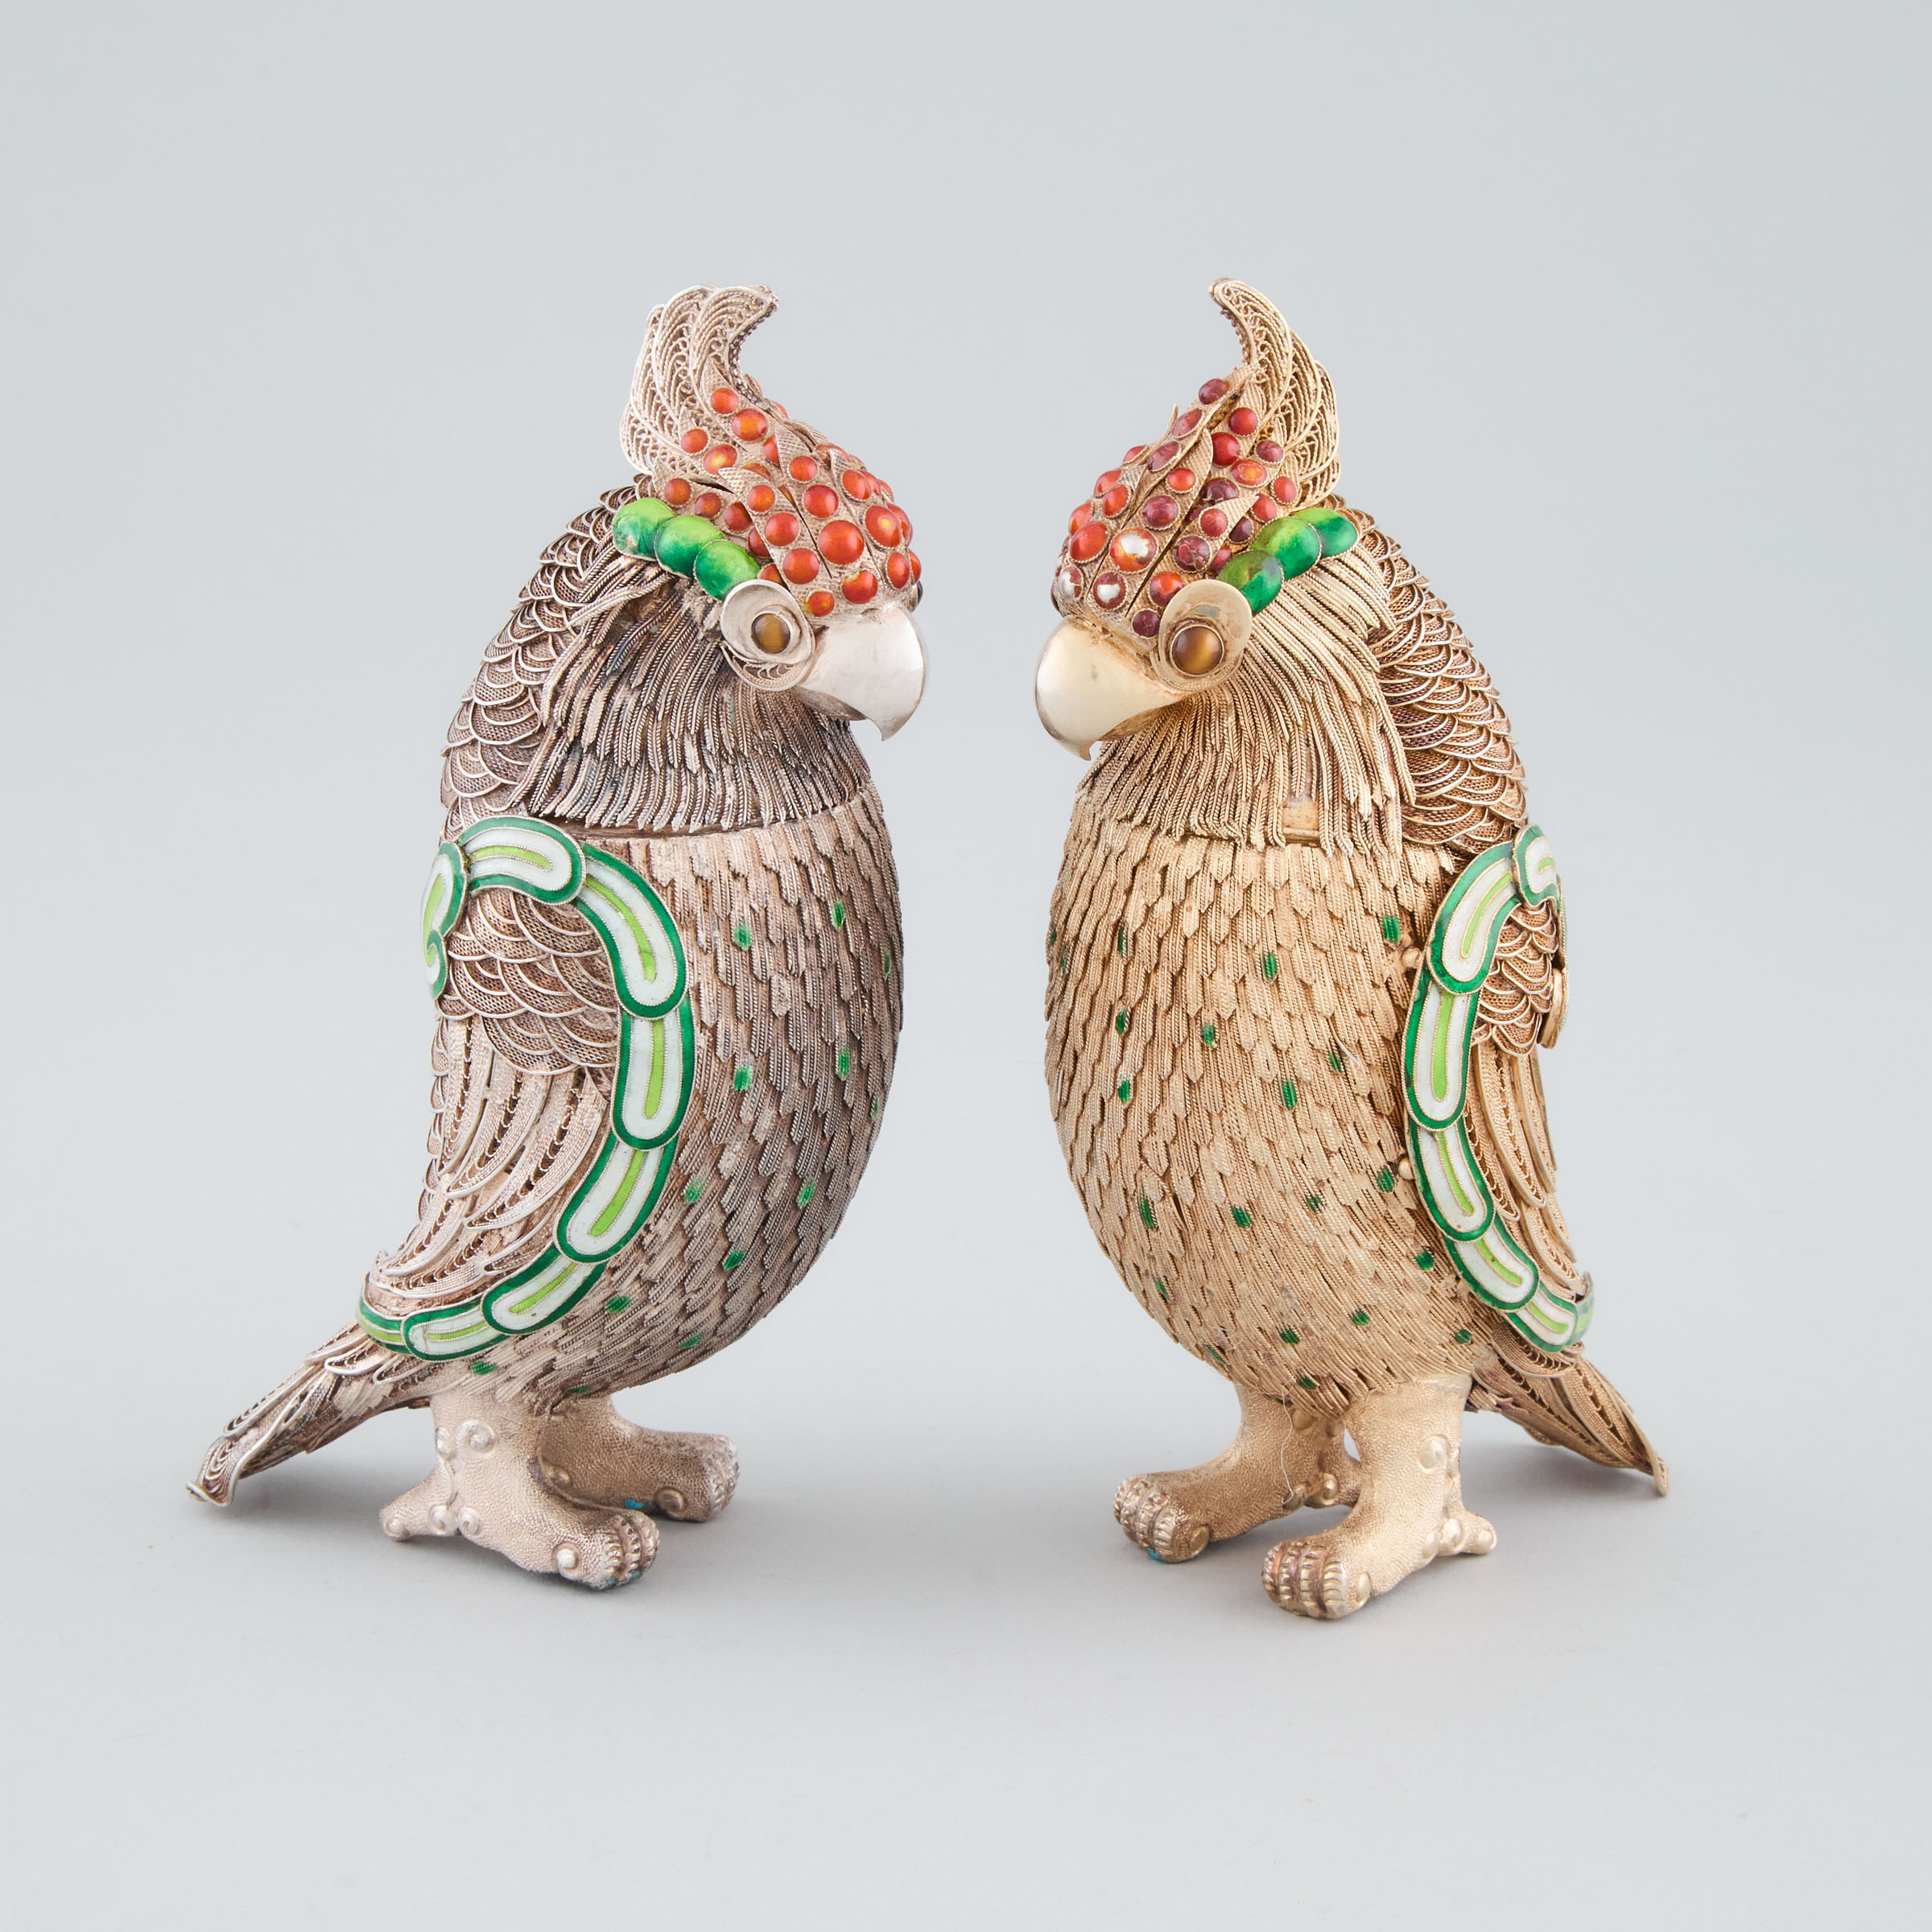 Pair of Chinese Silver or Silver-Gilt and Enamel Cockatiels, 20th century